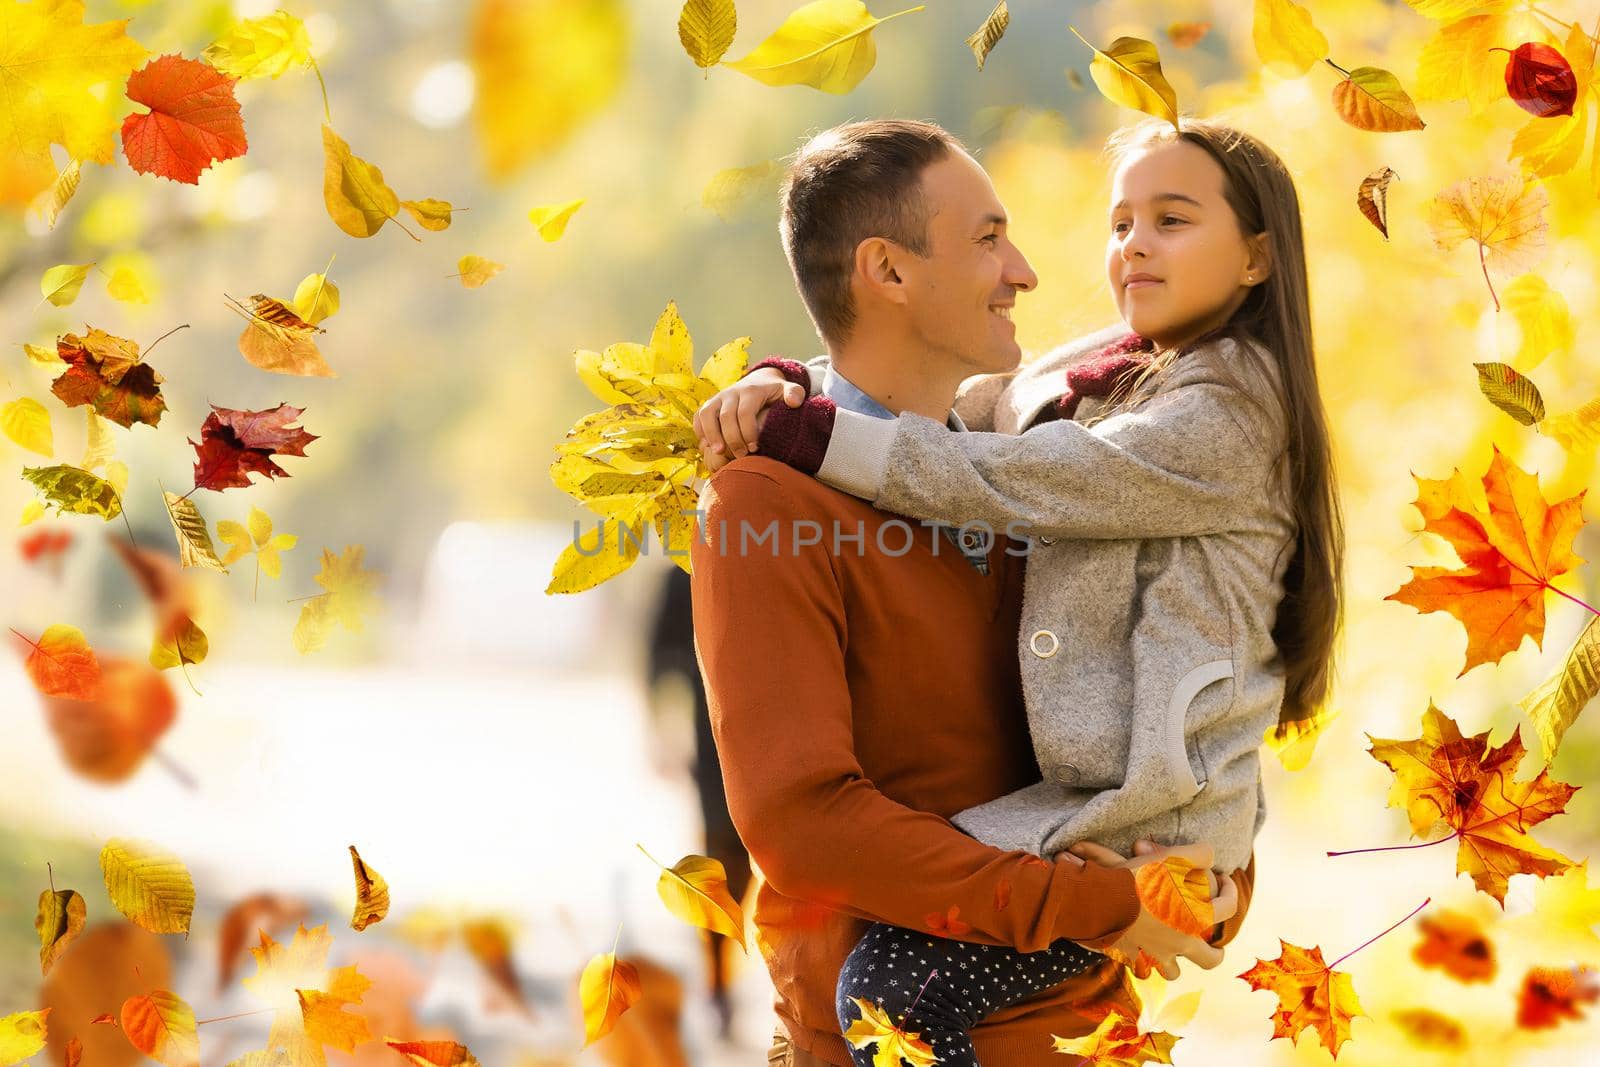 Happy family father and child daughter on a walk in the autumn leaf fall in park. High quality photo